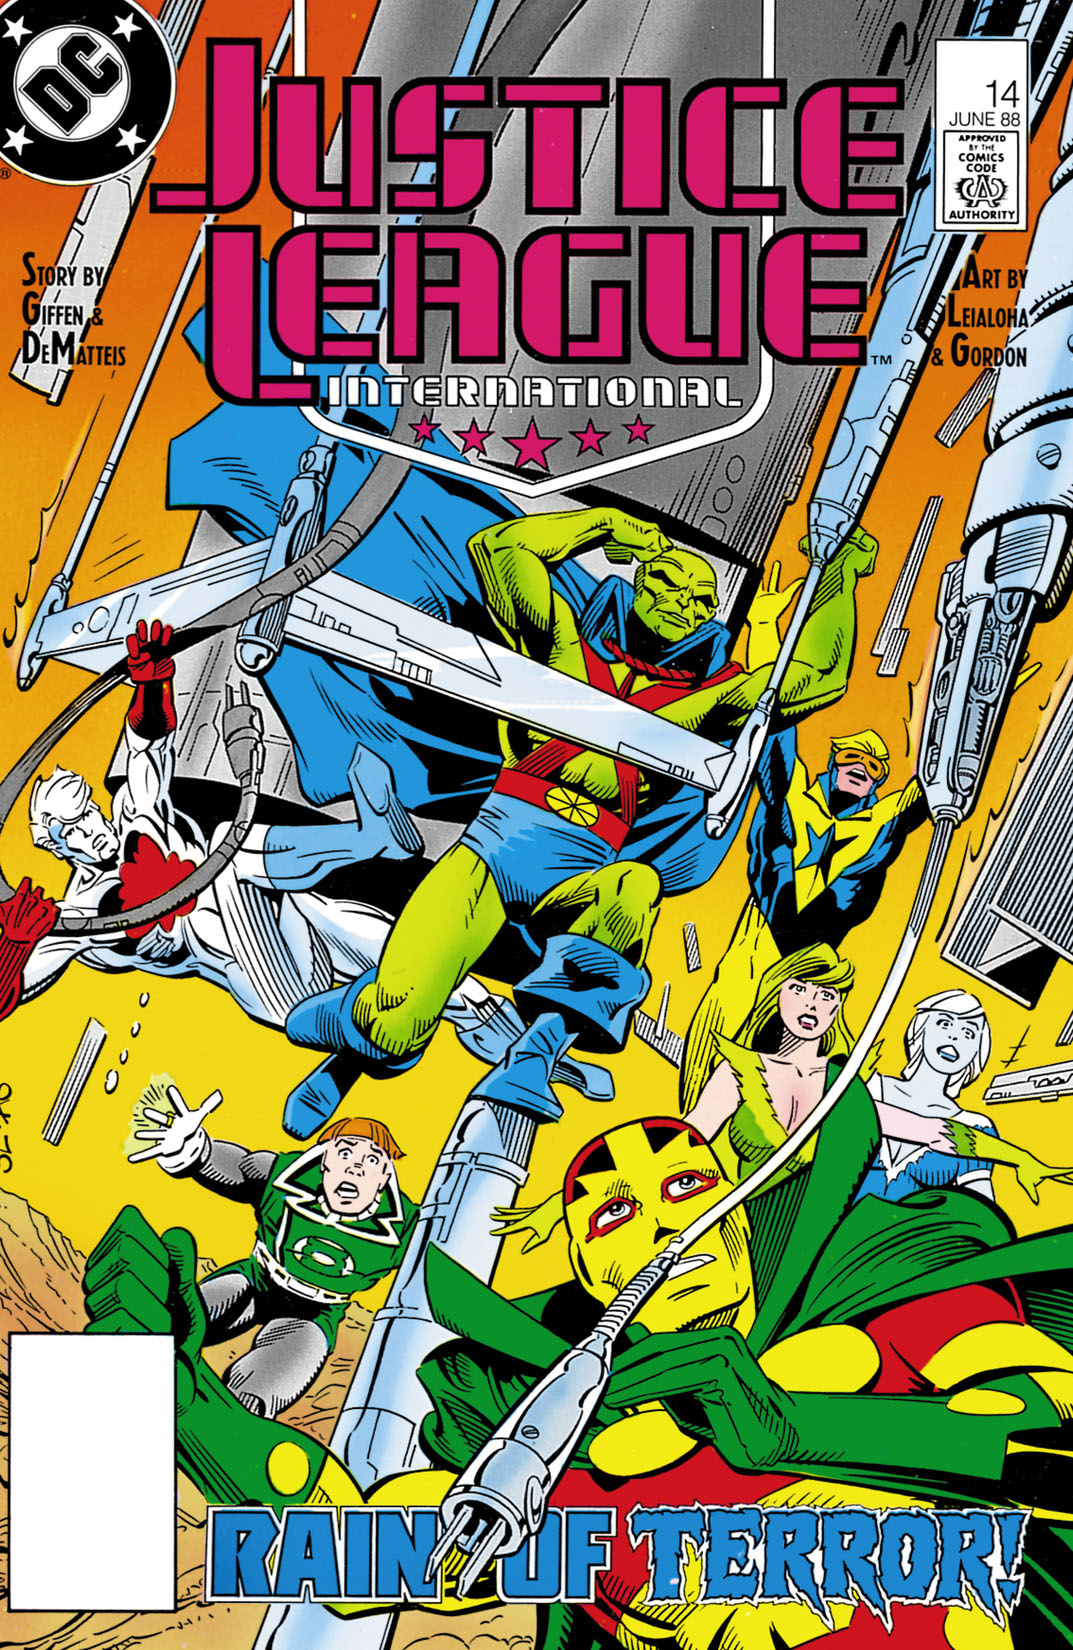 Justice League International (1987-) #14 preview images